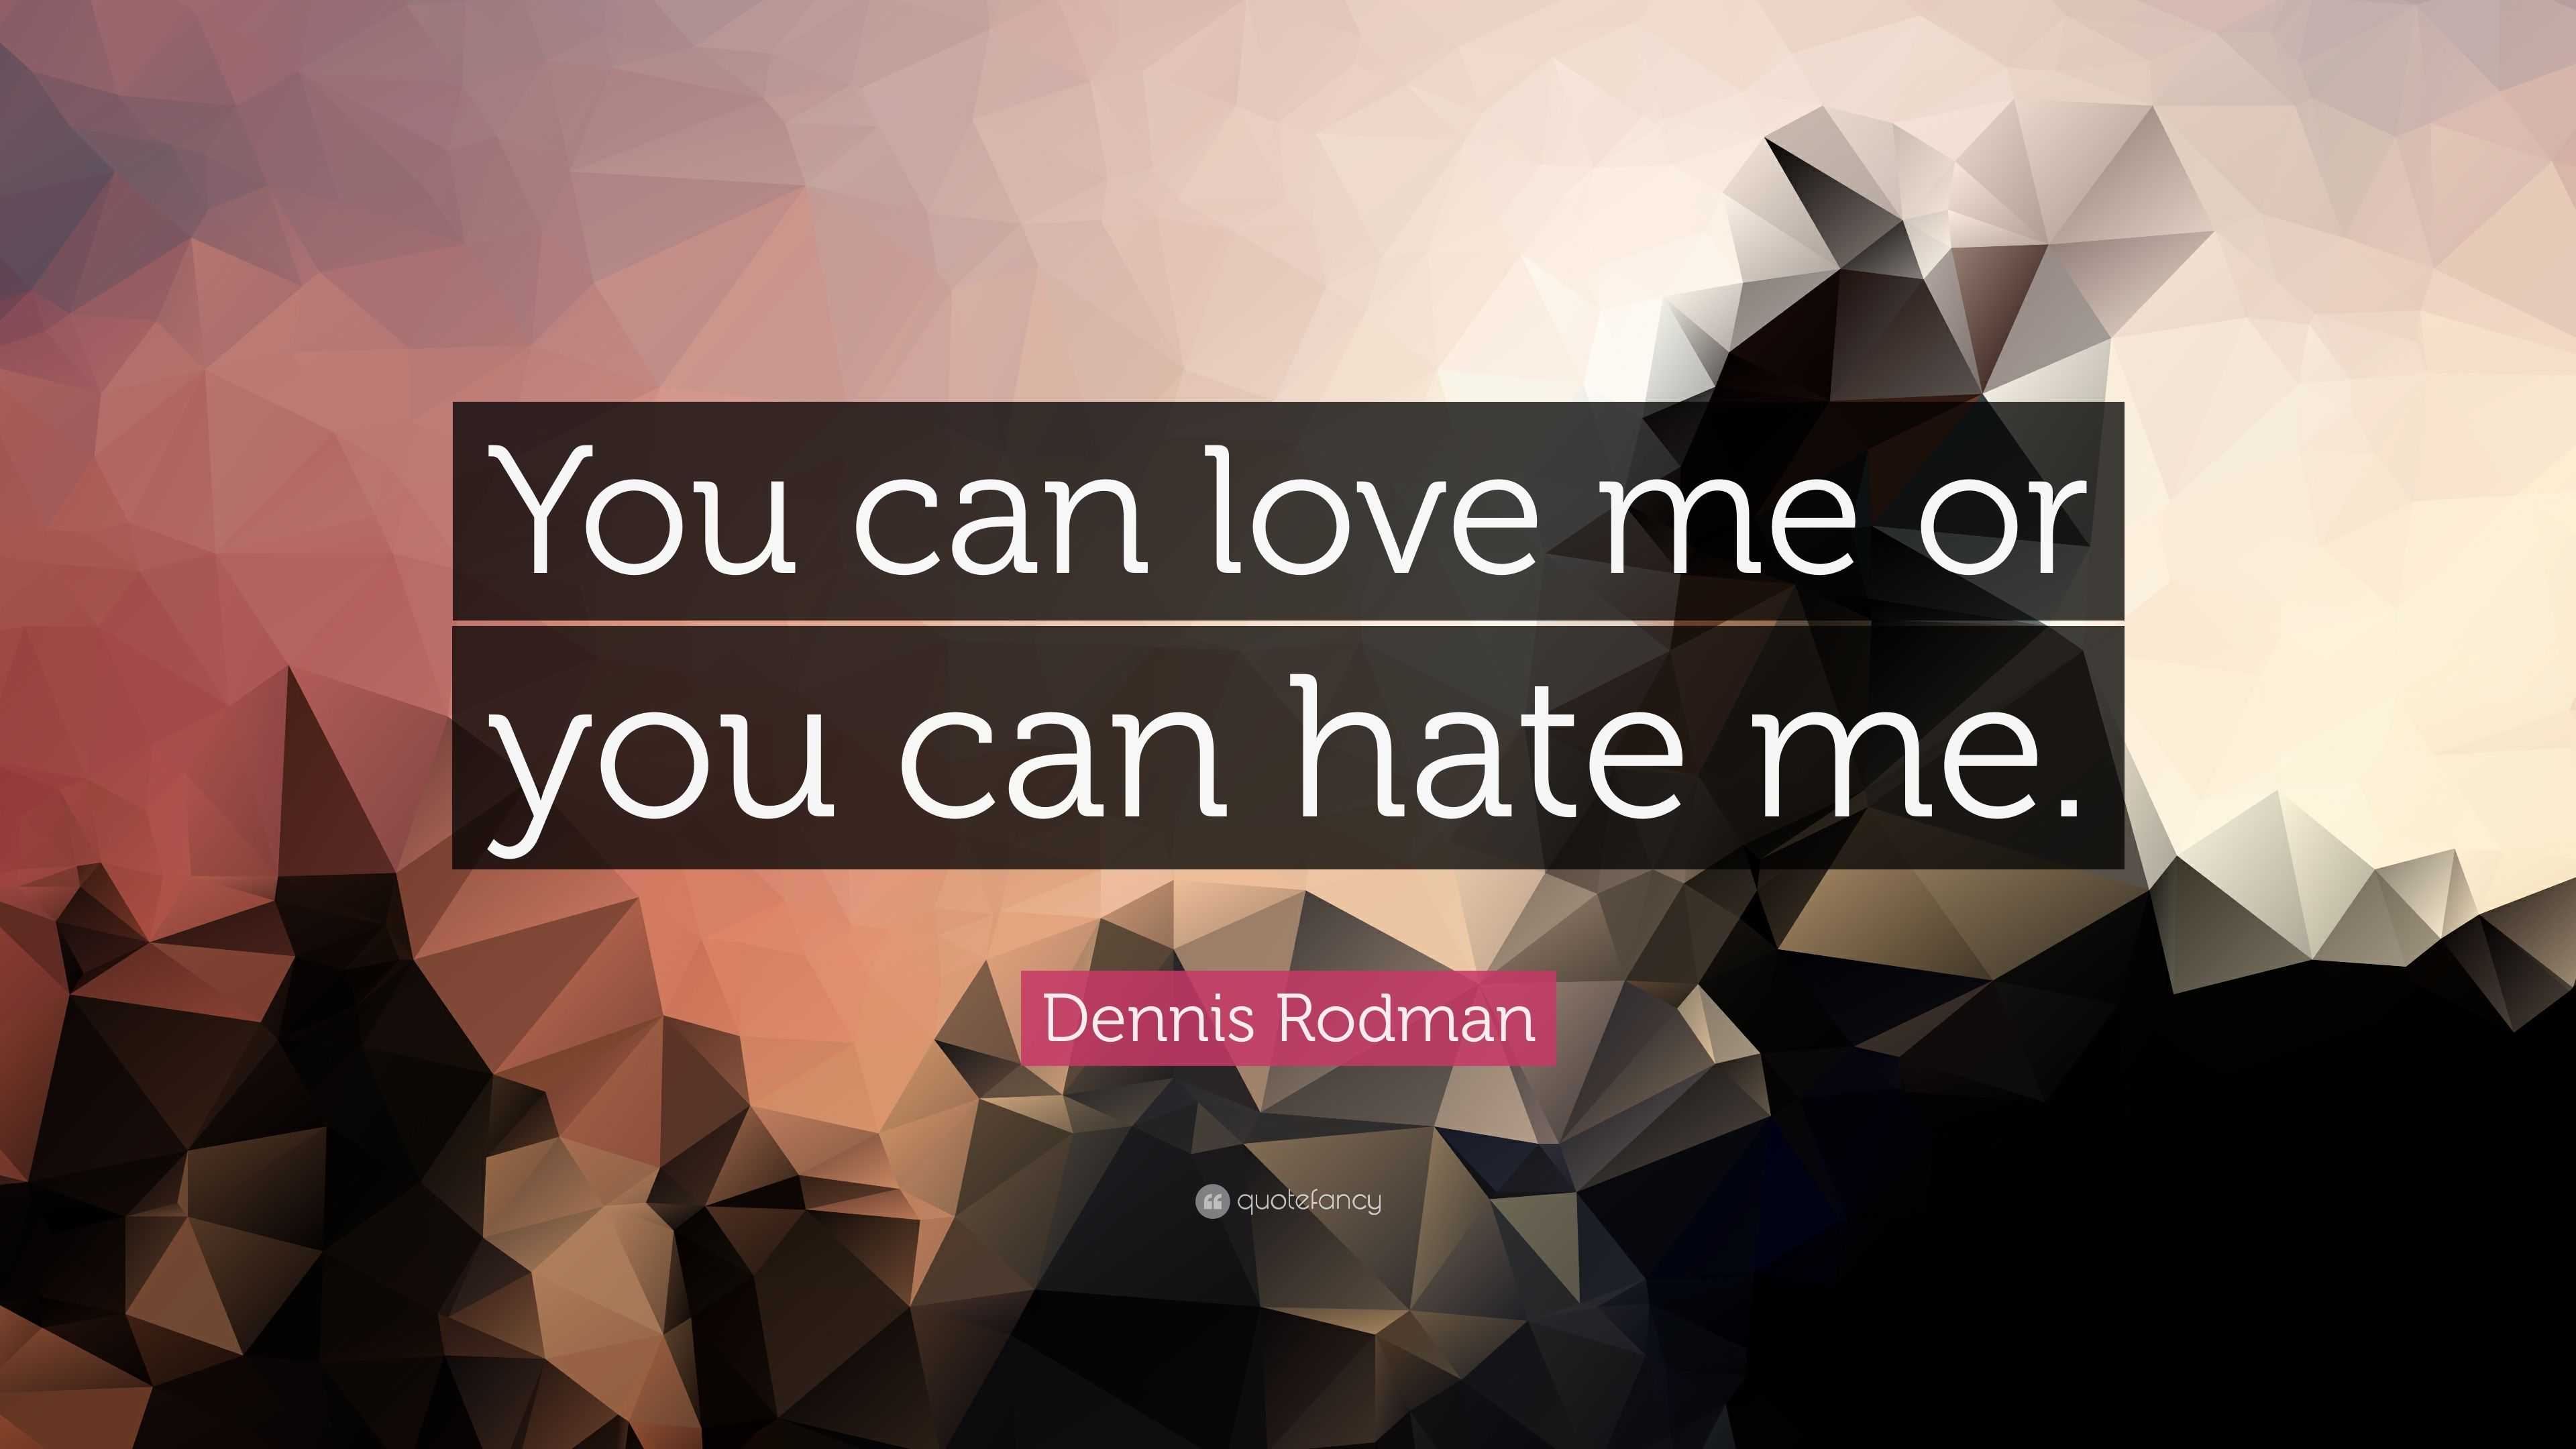 Dennis Rodman Quote “You can love me or you can hate me ”